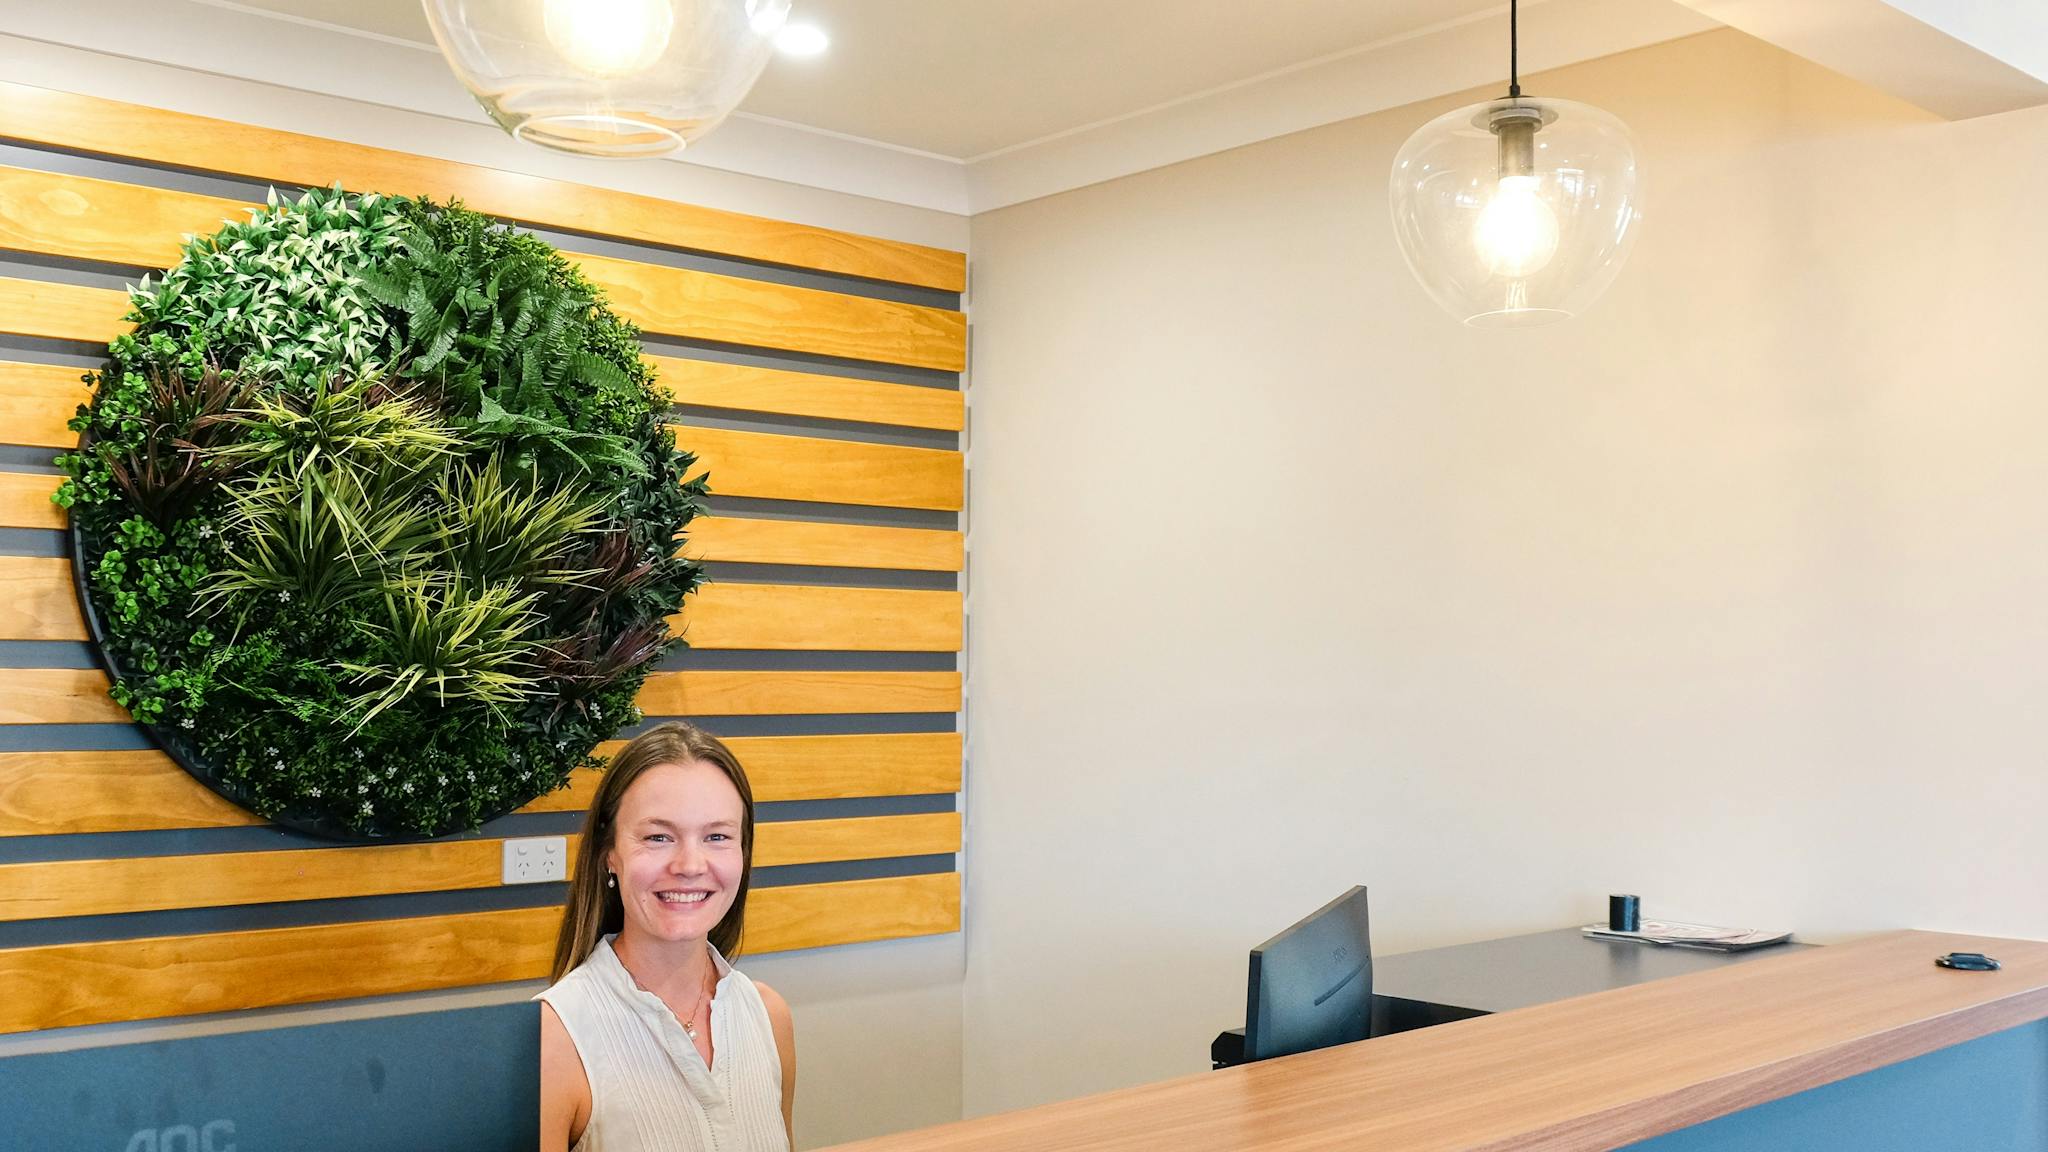 Inside reception area with a women sitting behind the desk. Green round plant in the background